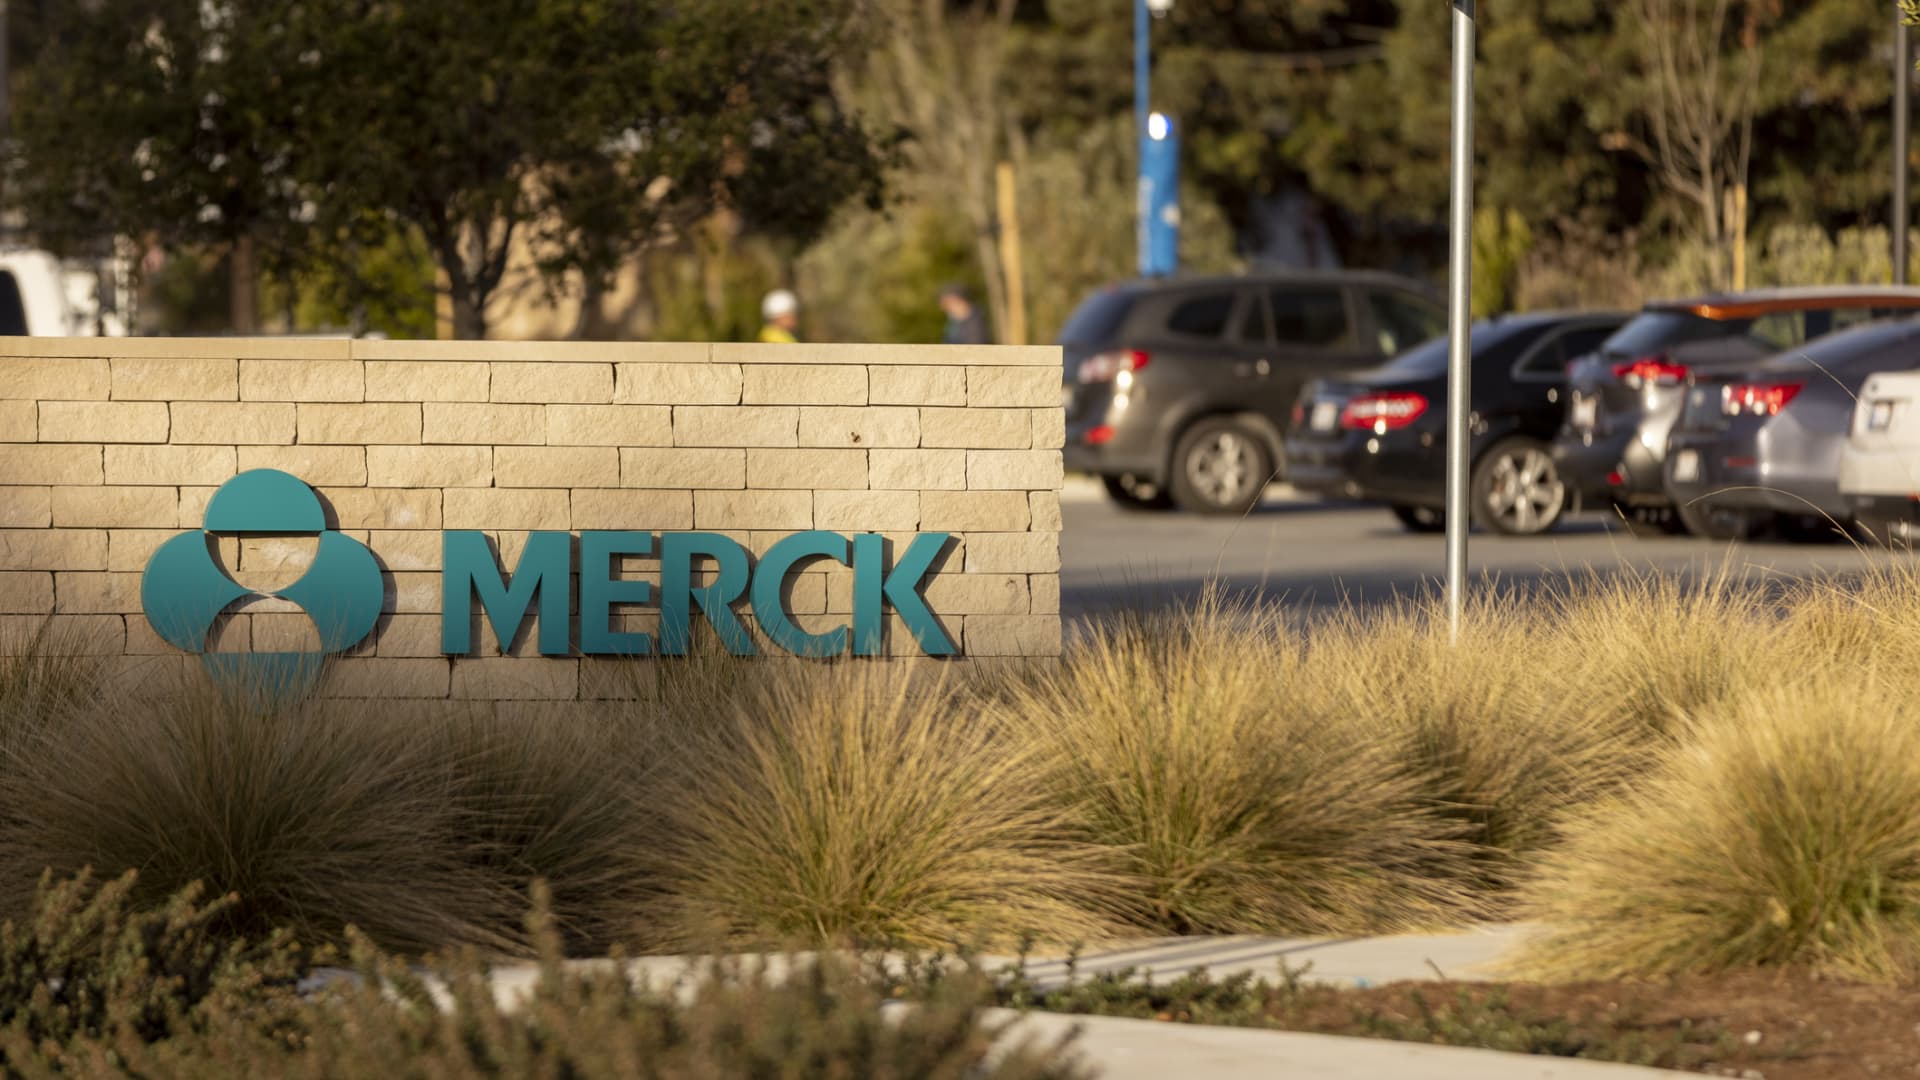 Newly built Merck research facility located at 213 E Grand Ave in South San Francisco.